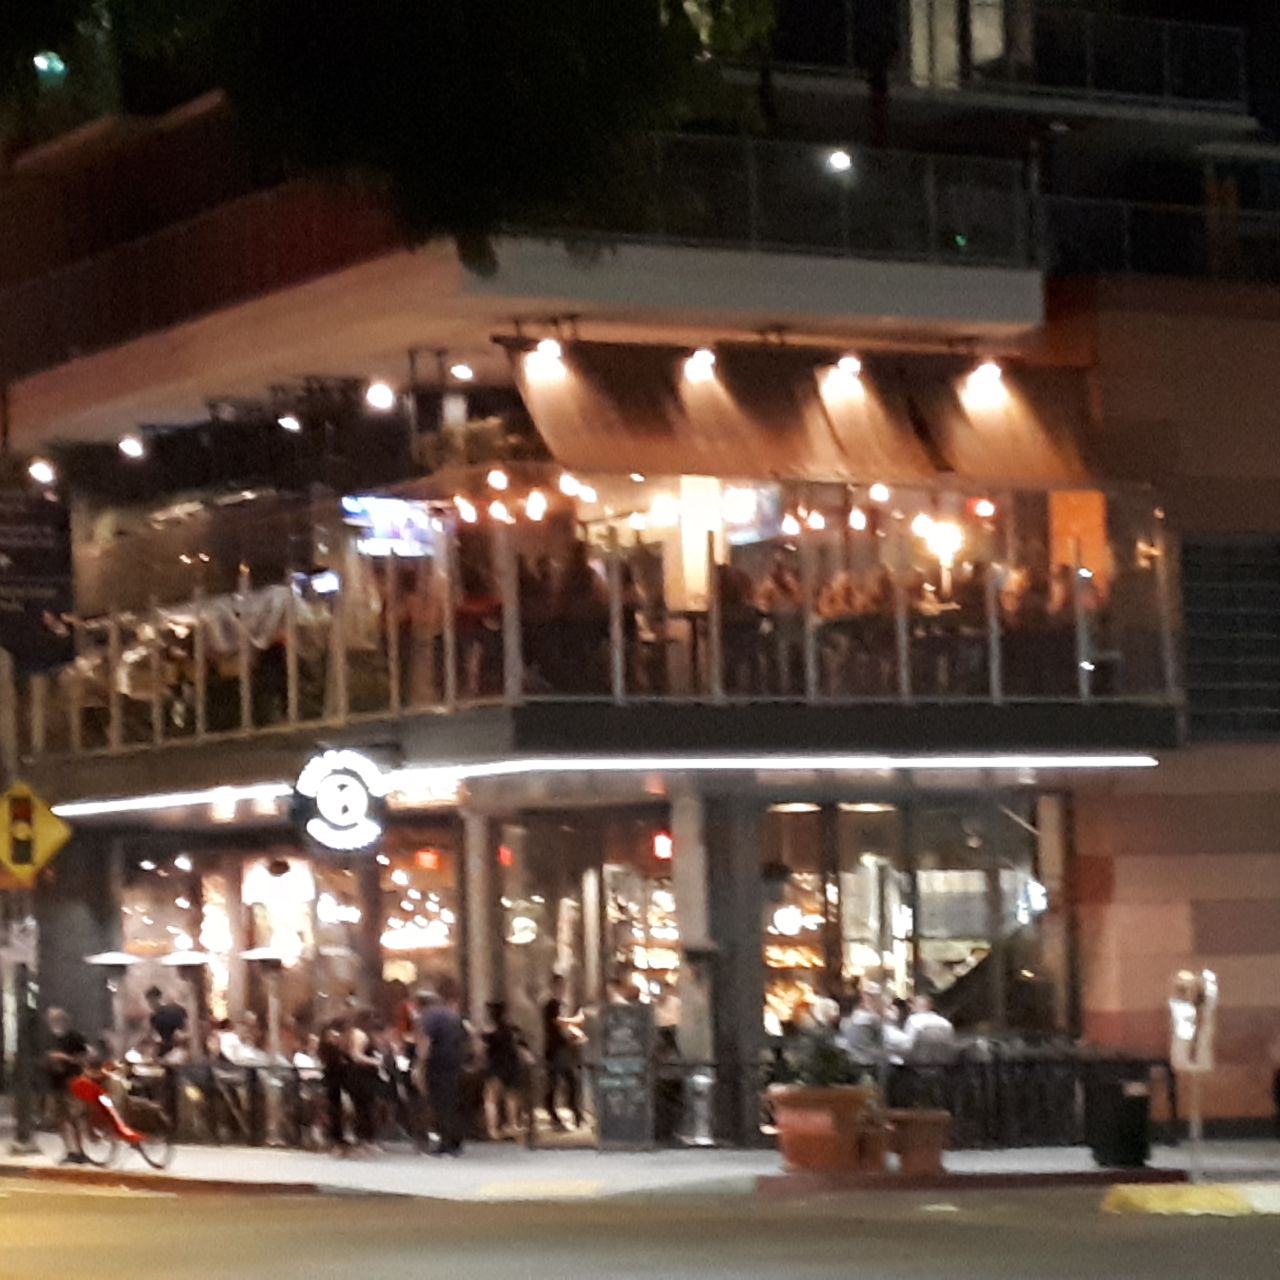 KING AND QUEEN CANTINA, San Diego - Restaurant Reviews, Photos &  Reservations - Tripadvisor